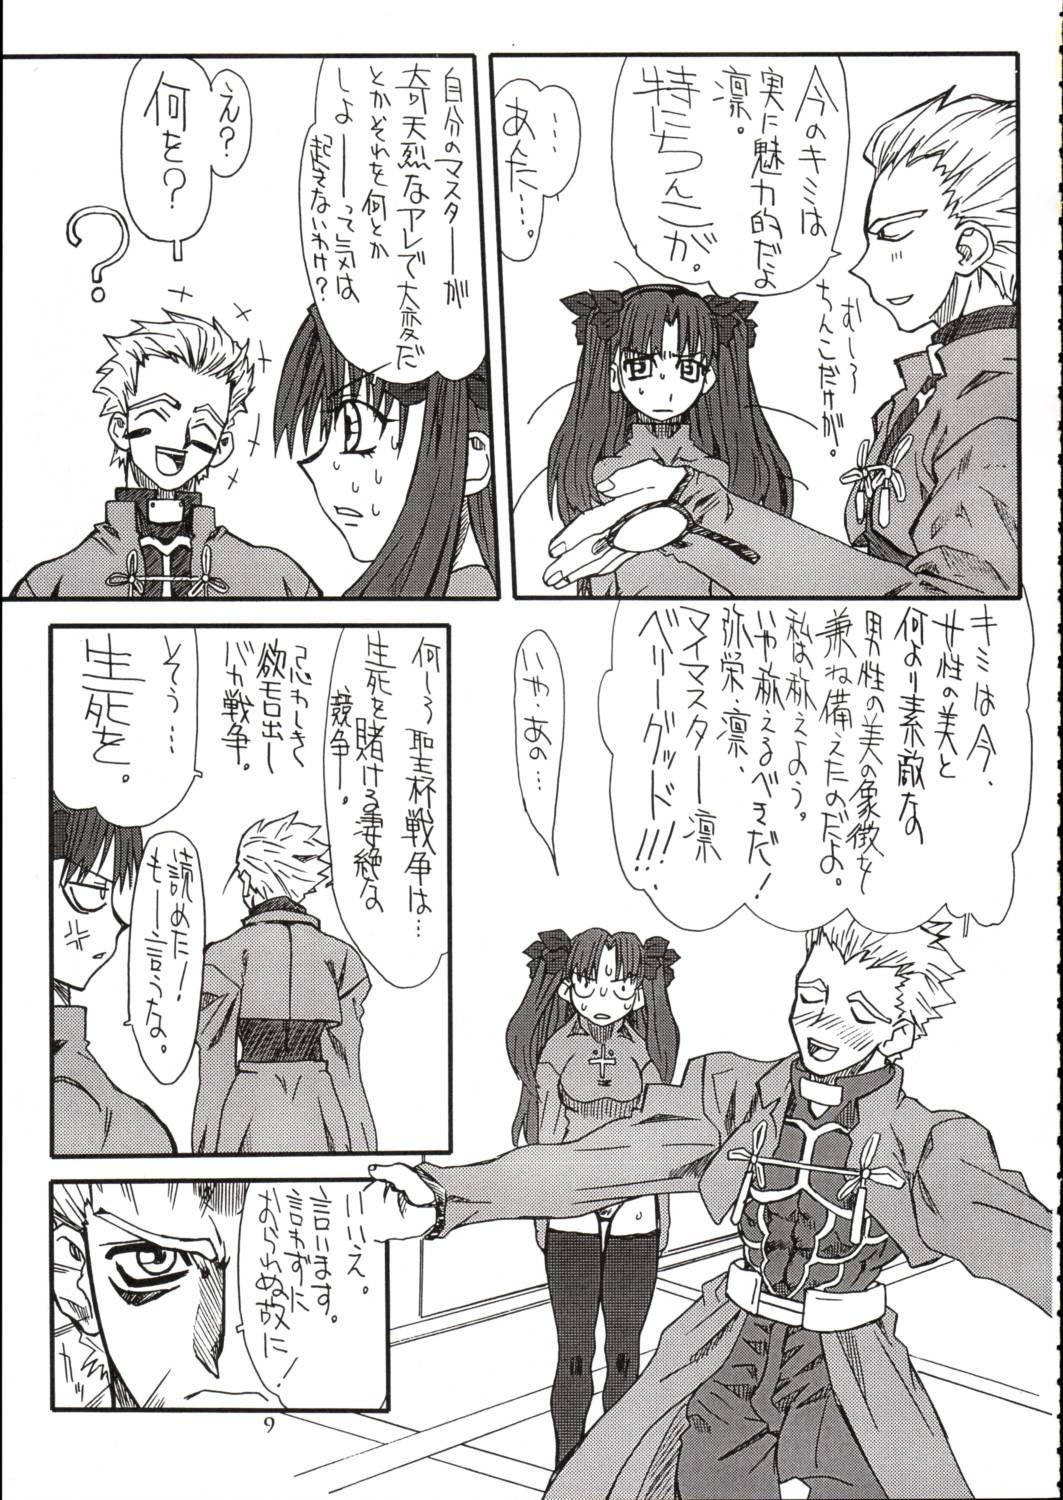 Mulher Azuki Been - Fate stay night Dominate - Page 8